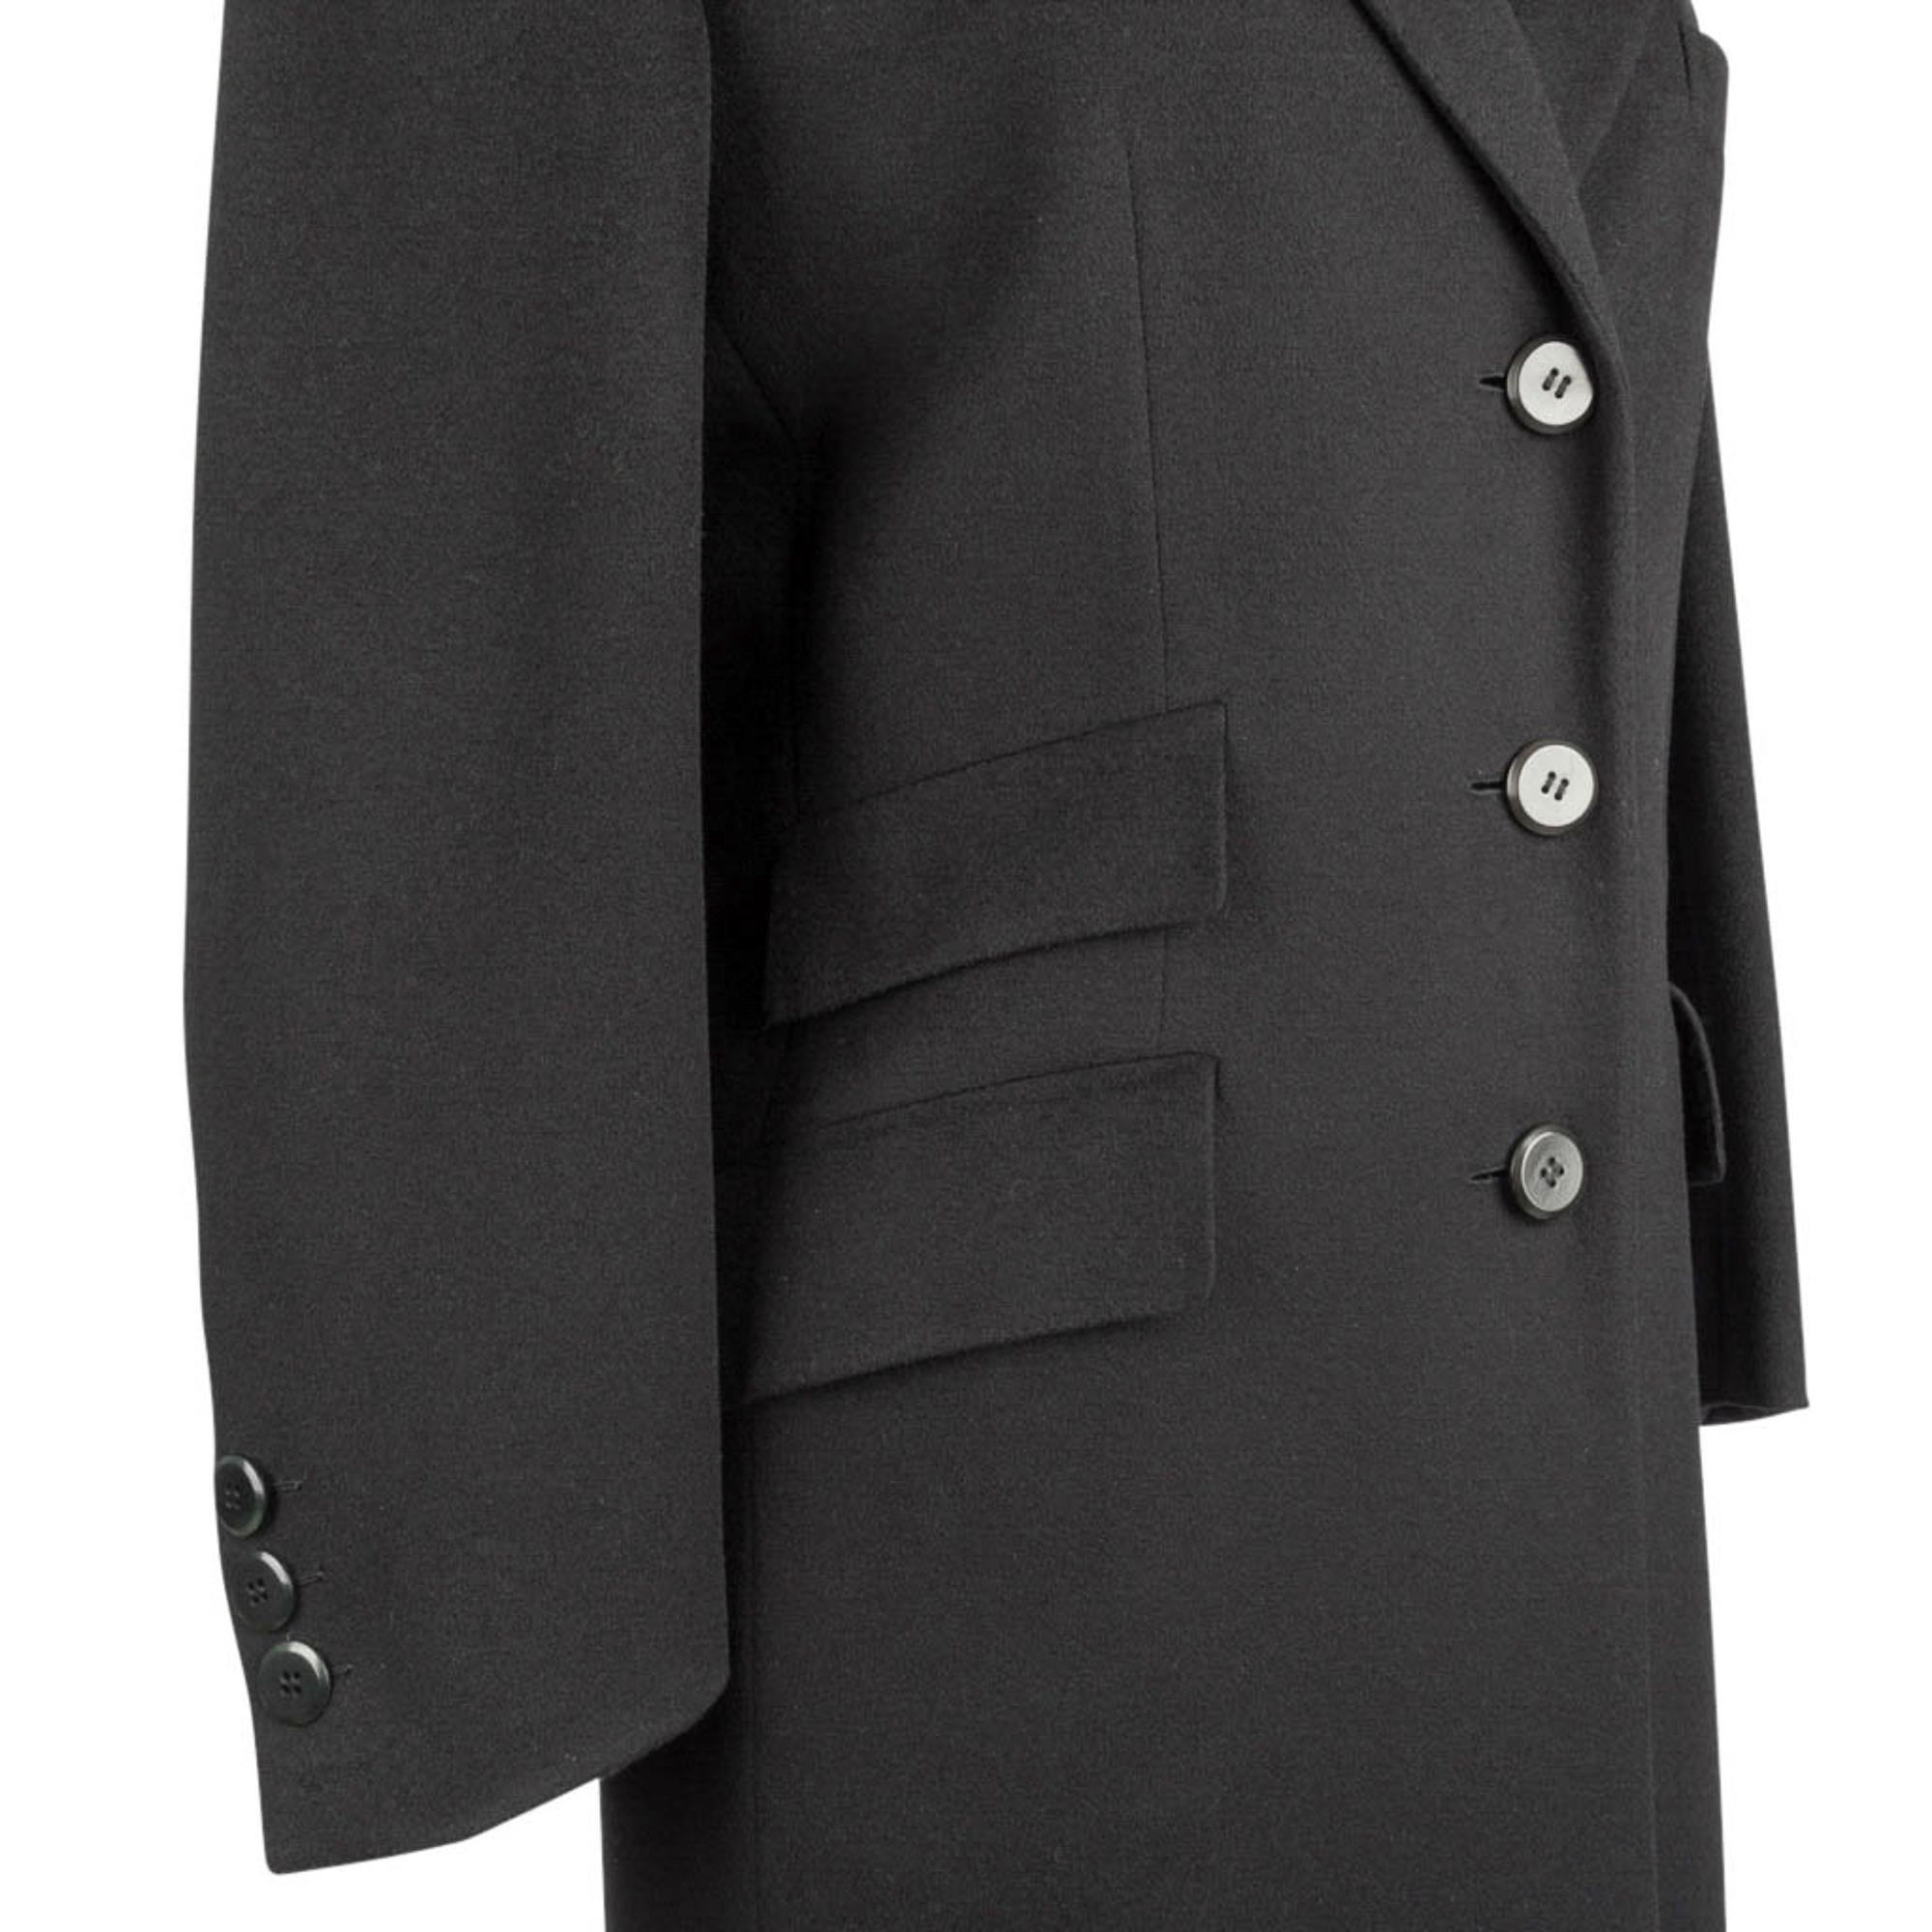 Guaranteed authentic Donna Brioni classic maxi Cashmere black coat.  
Chic, classic, timeless - the most perfect elements.
3 Button single breast.
Right side has the two pockets English element.  The smaller upper pocket is faux.
Breast pocket on